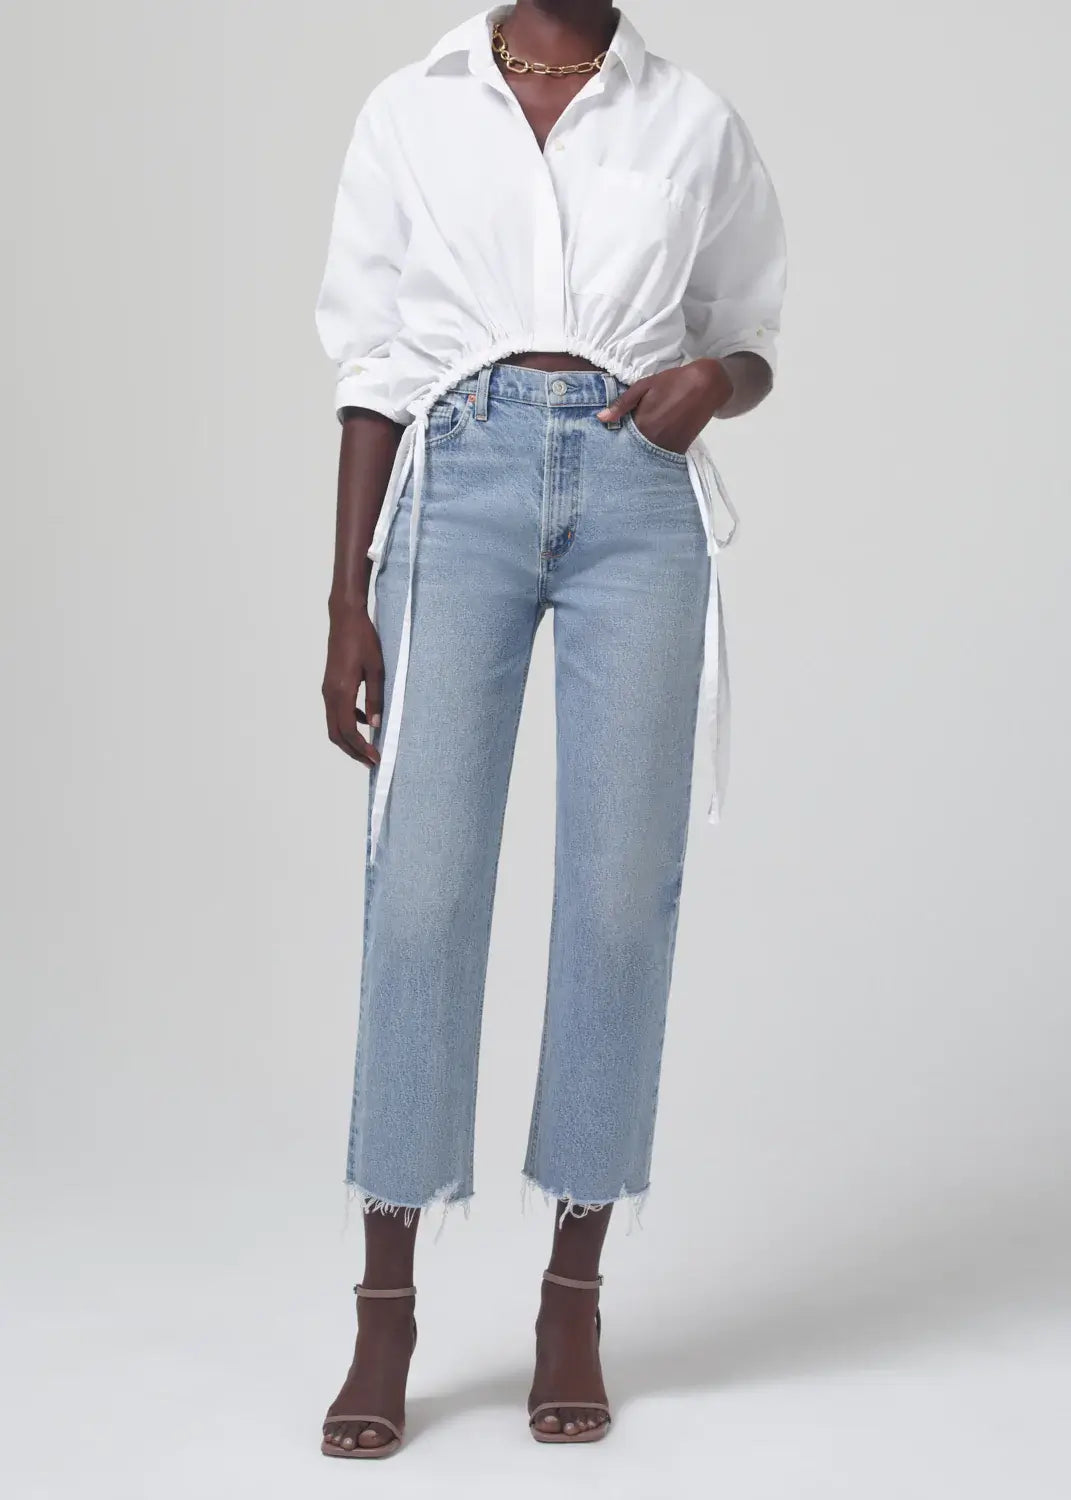 Citizens of Humanity Alexandra Top in White from The New Trend 